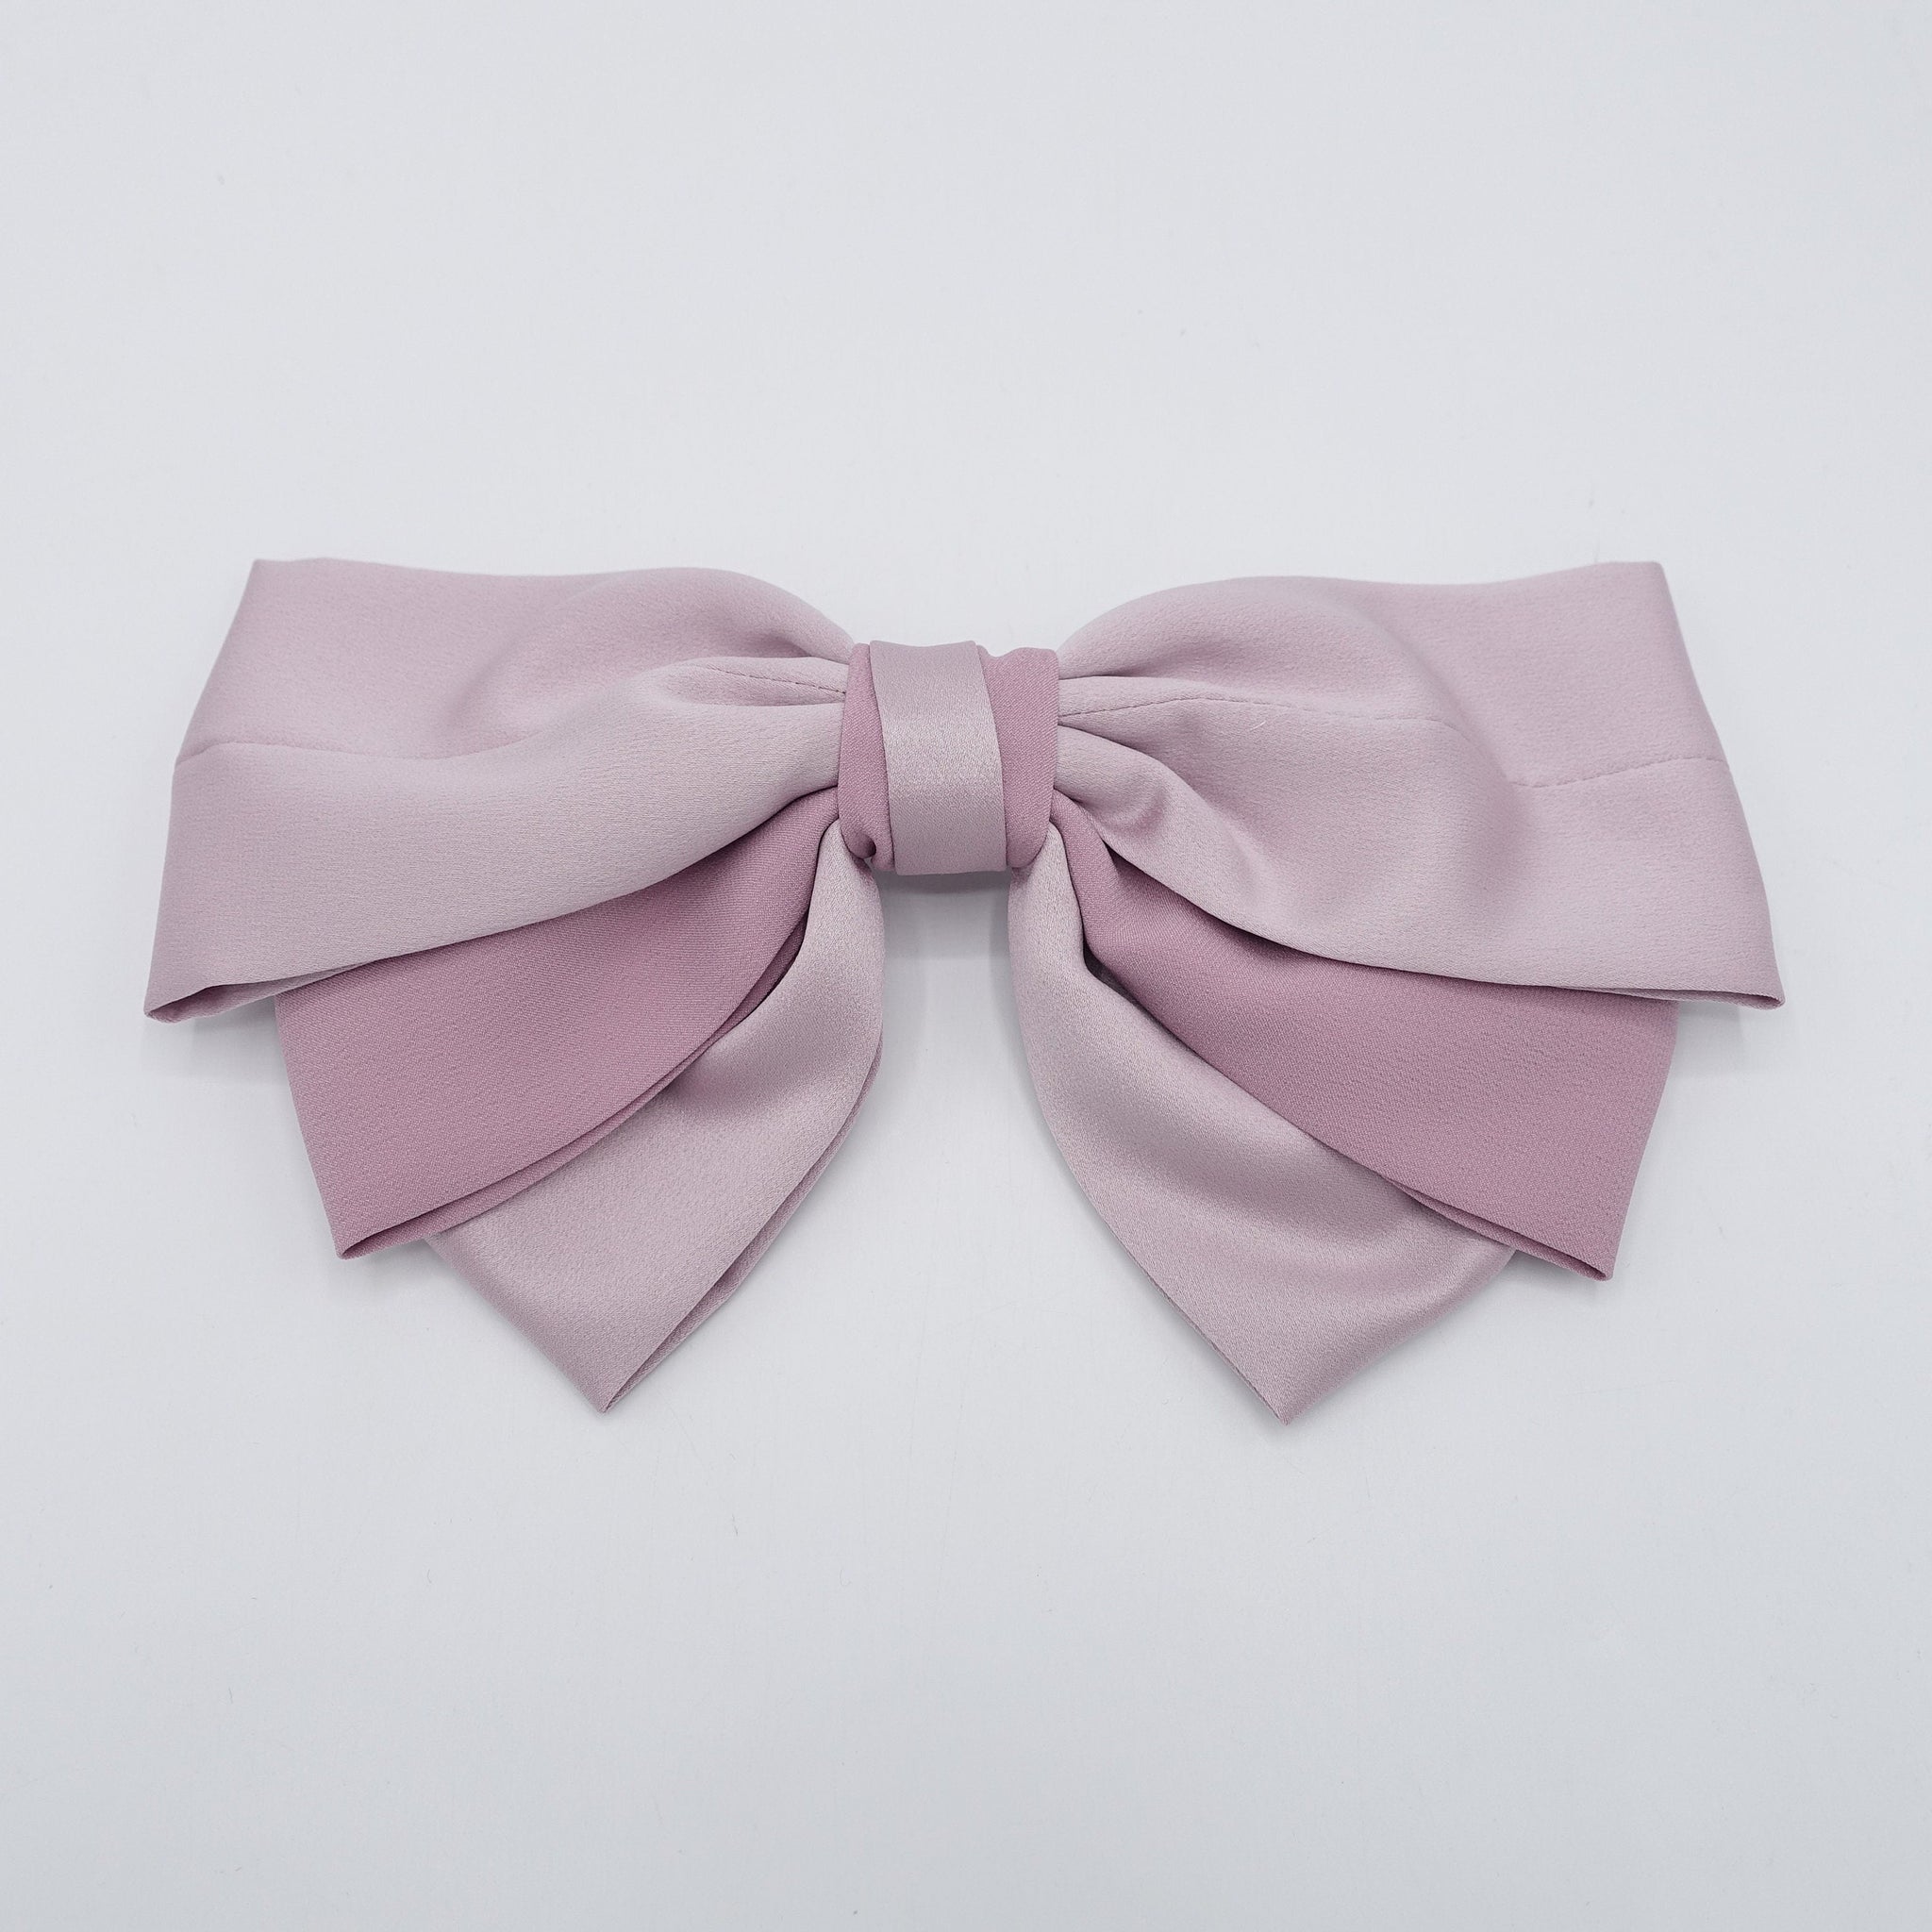 veryshine.com Barrette (Bow) Lavnder pink satin hair bow 2 tone double layered hair accessory for women